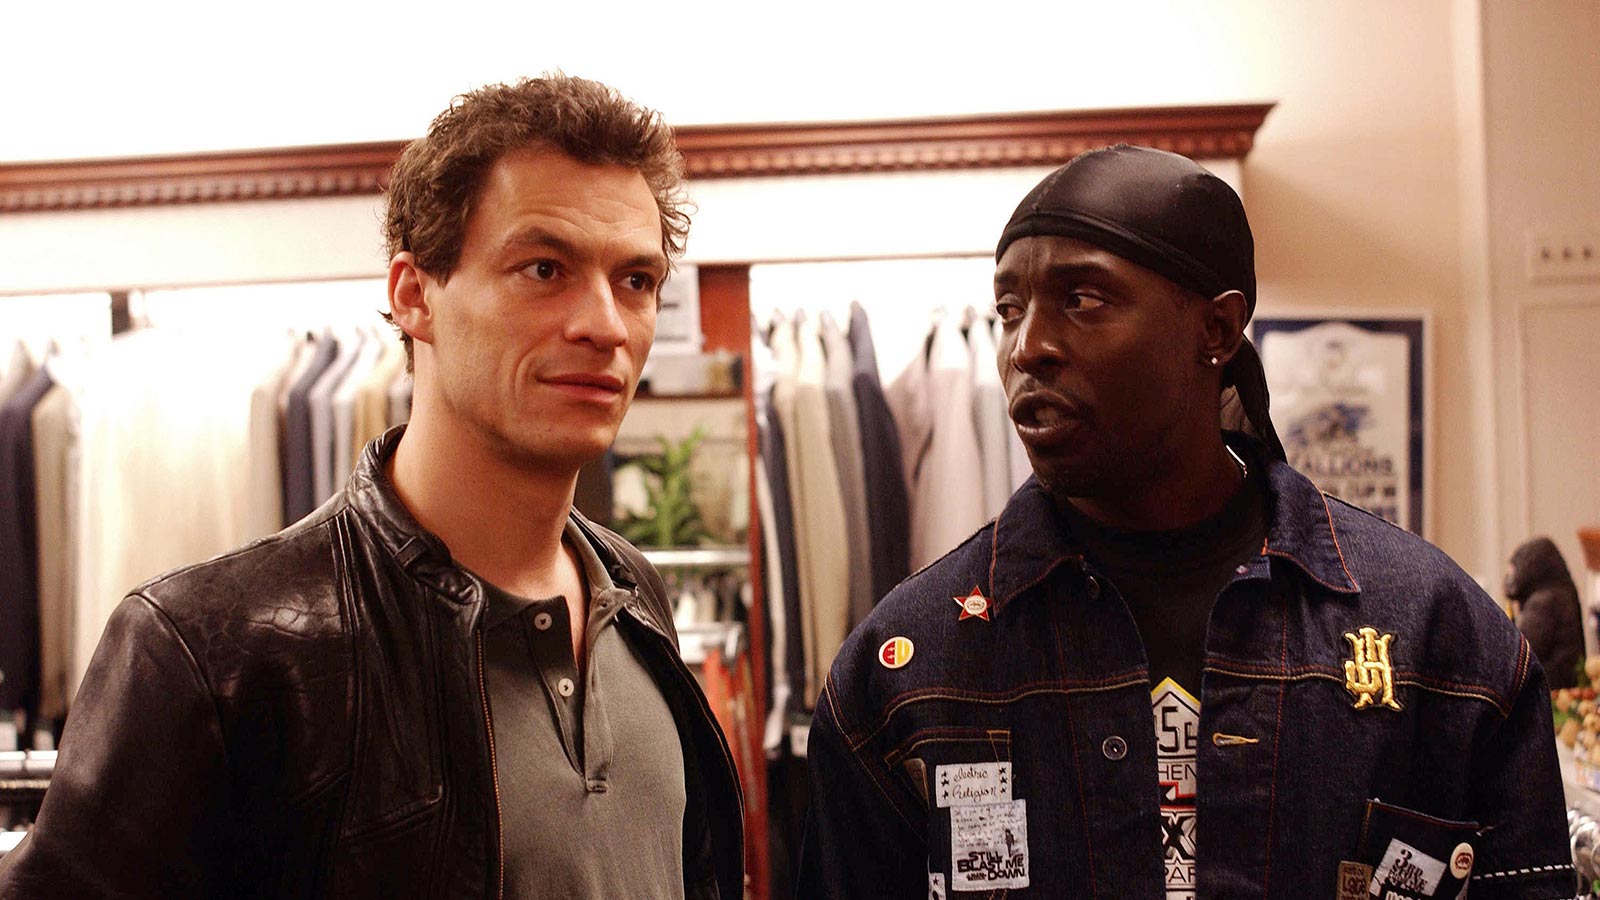 Michael K. Williams (right) as Omar Little in The Wire. (Photo: Moviestore Collection Ltd/Alamy)